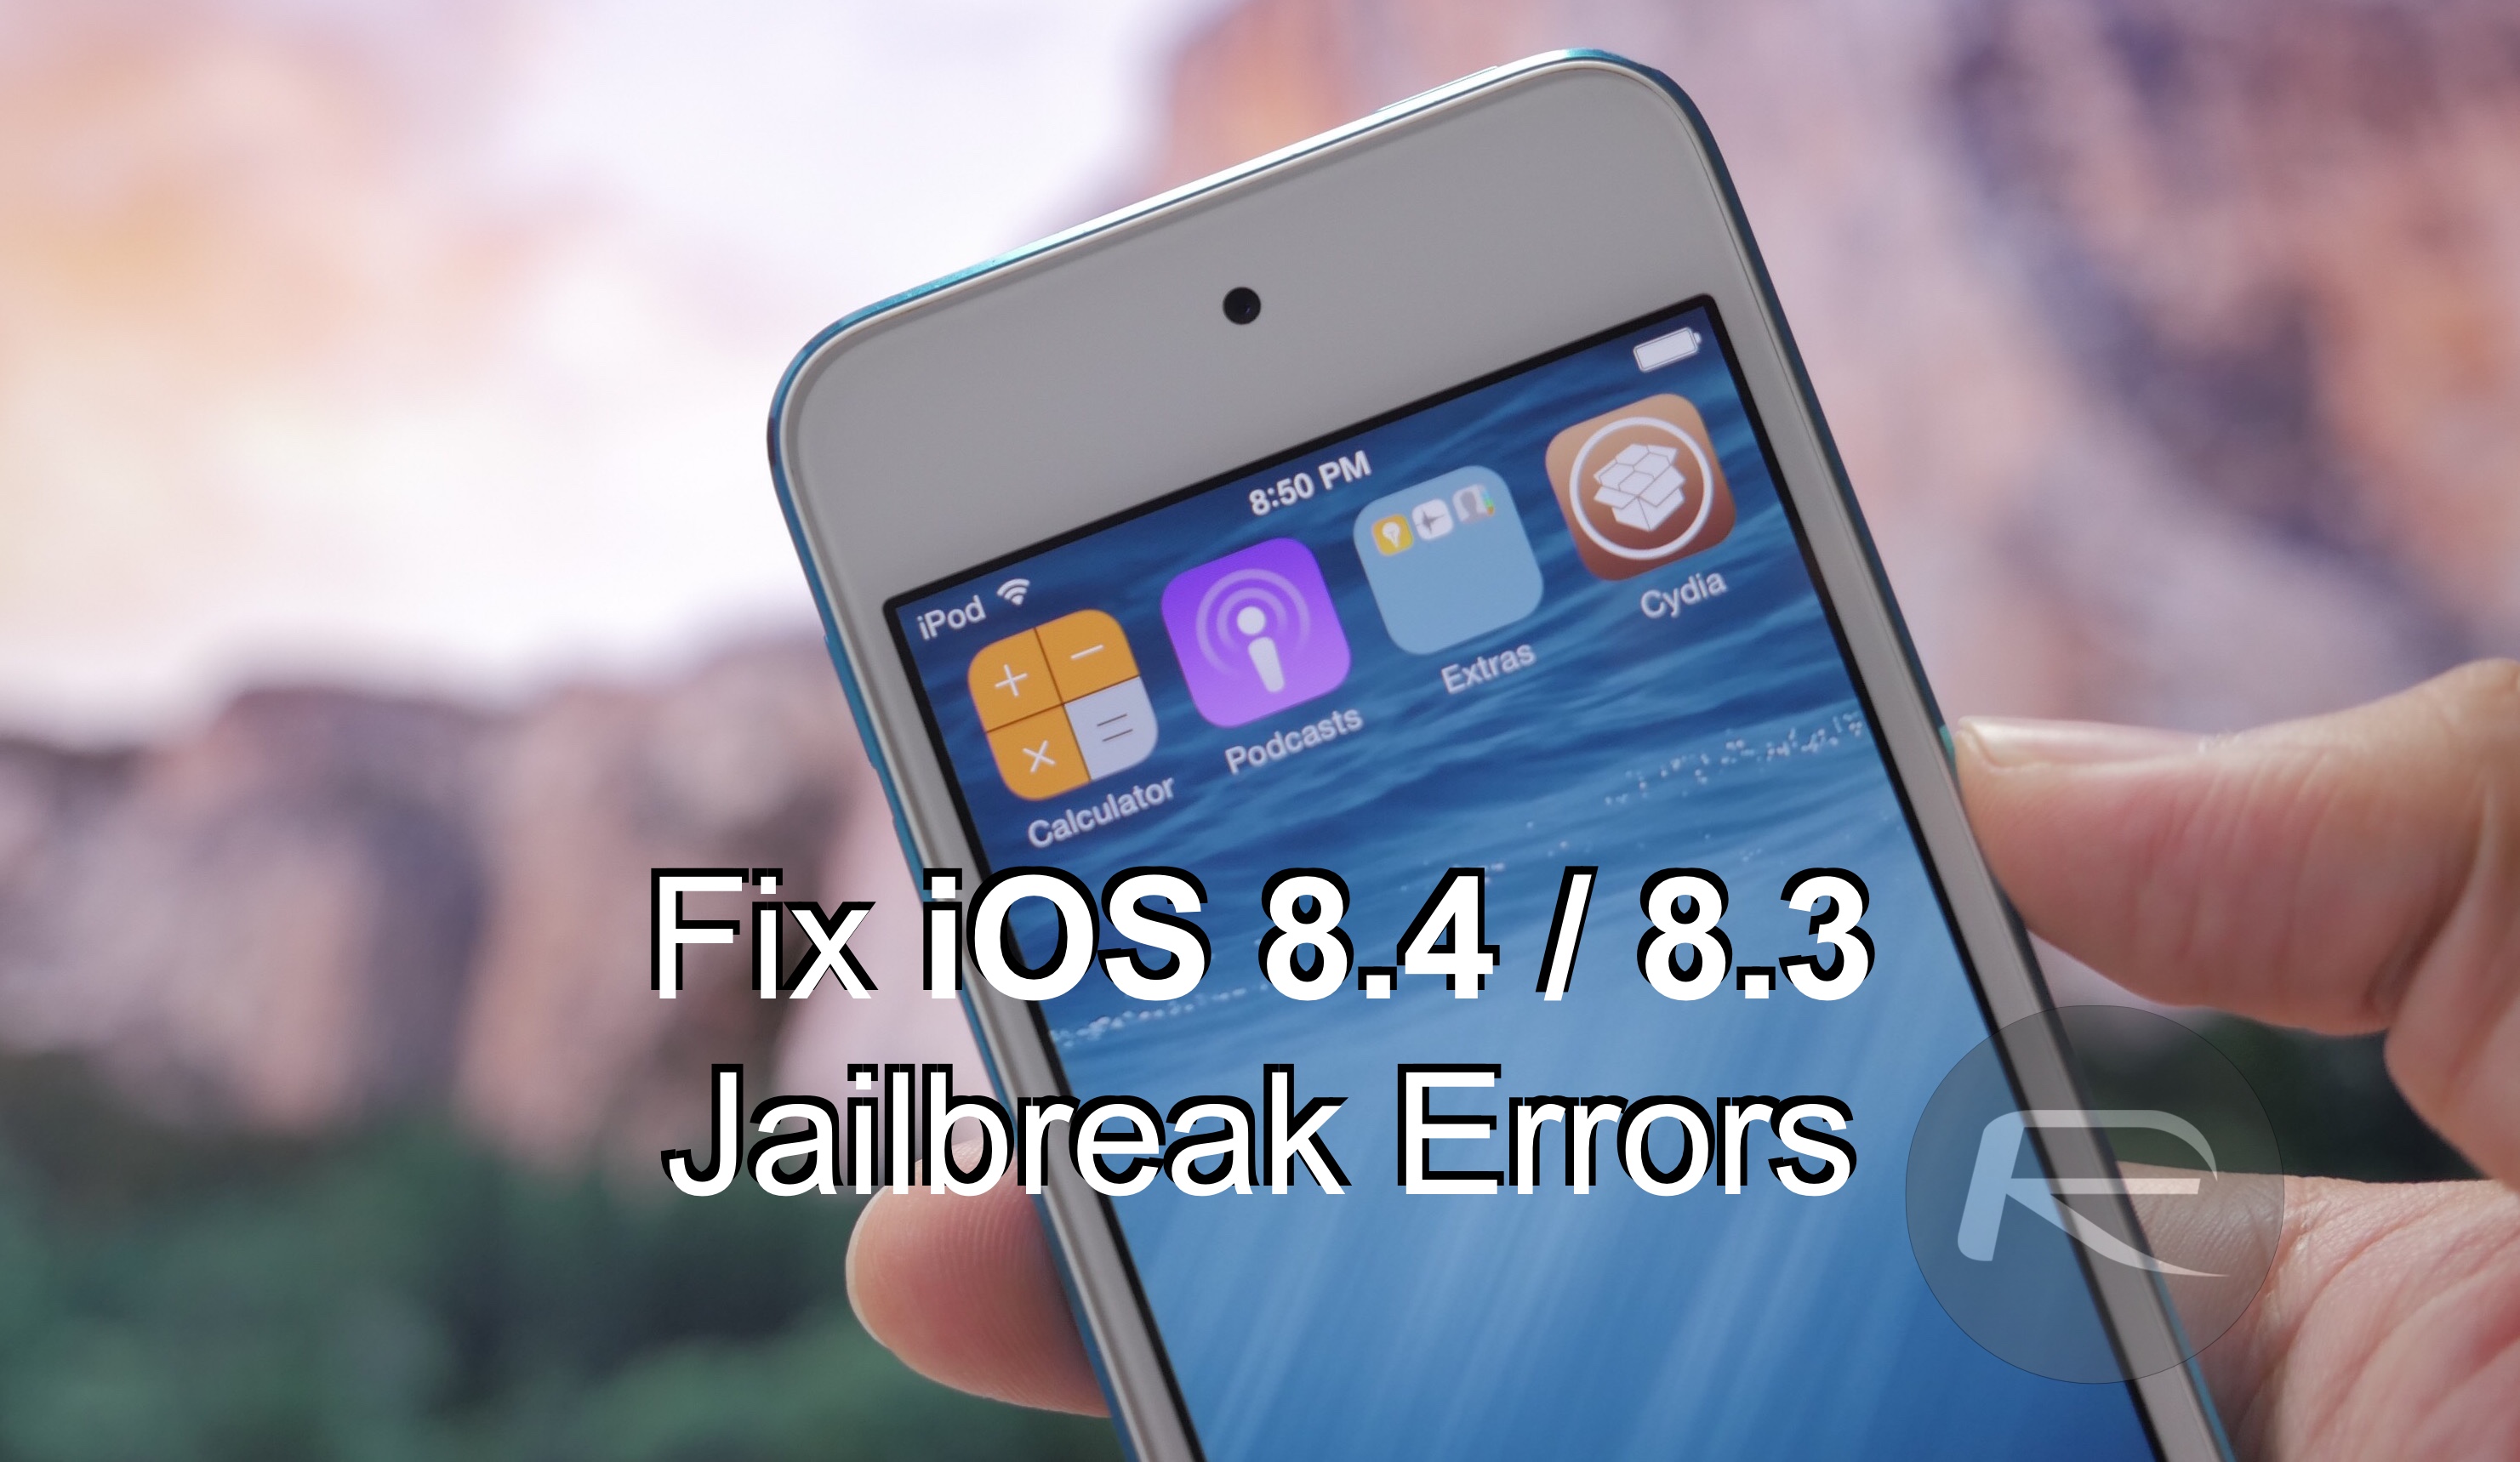 Fix TaiG iOS 8.4/8.3 Jailbreak Error 1101, 1102, 1103 And More [Troubleshooting Guide]